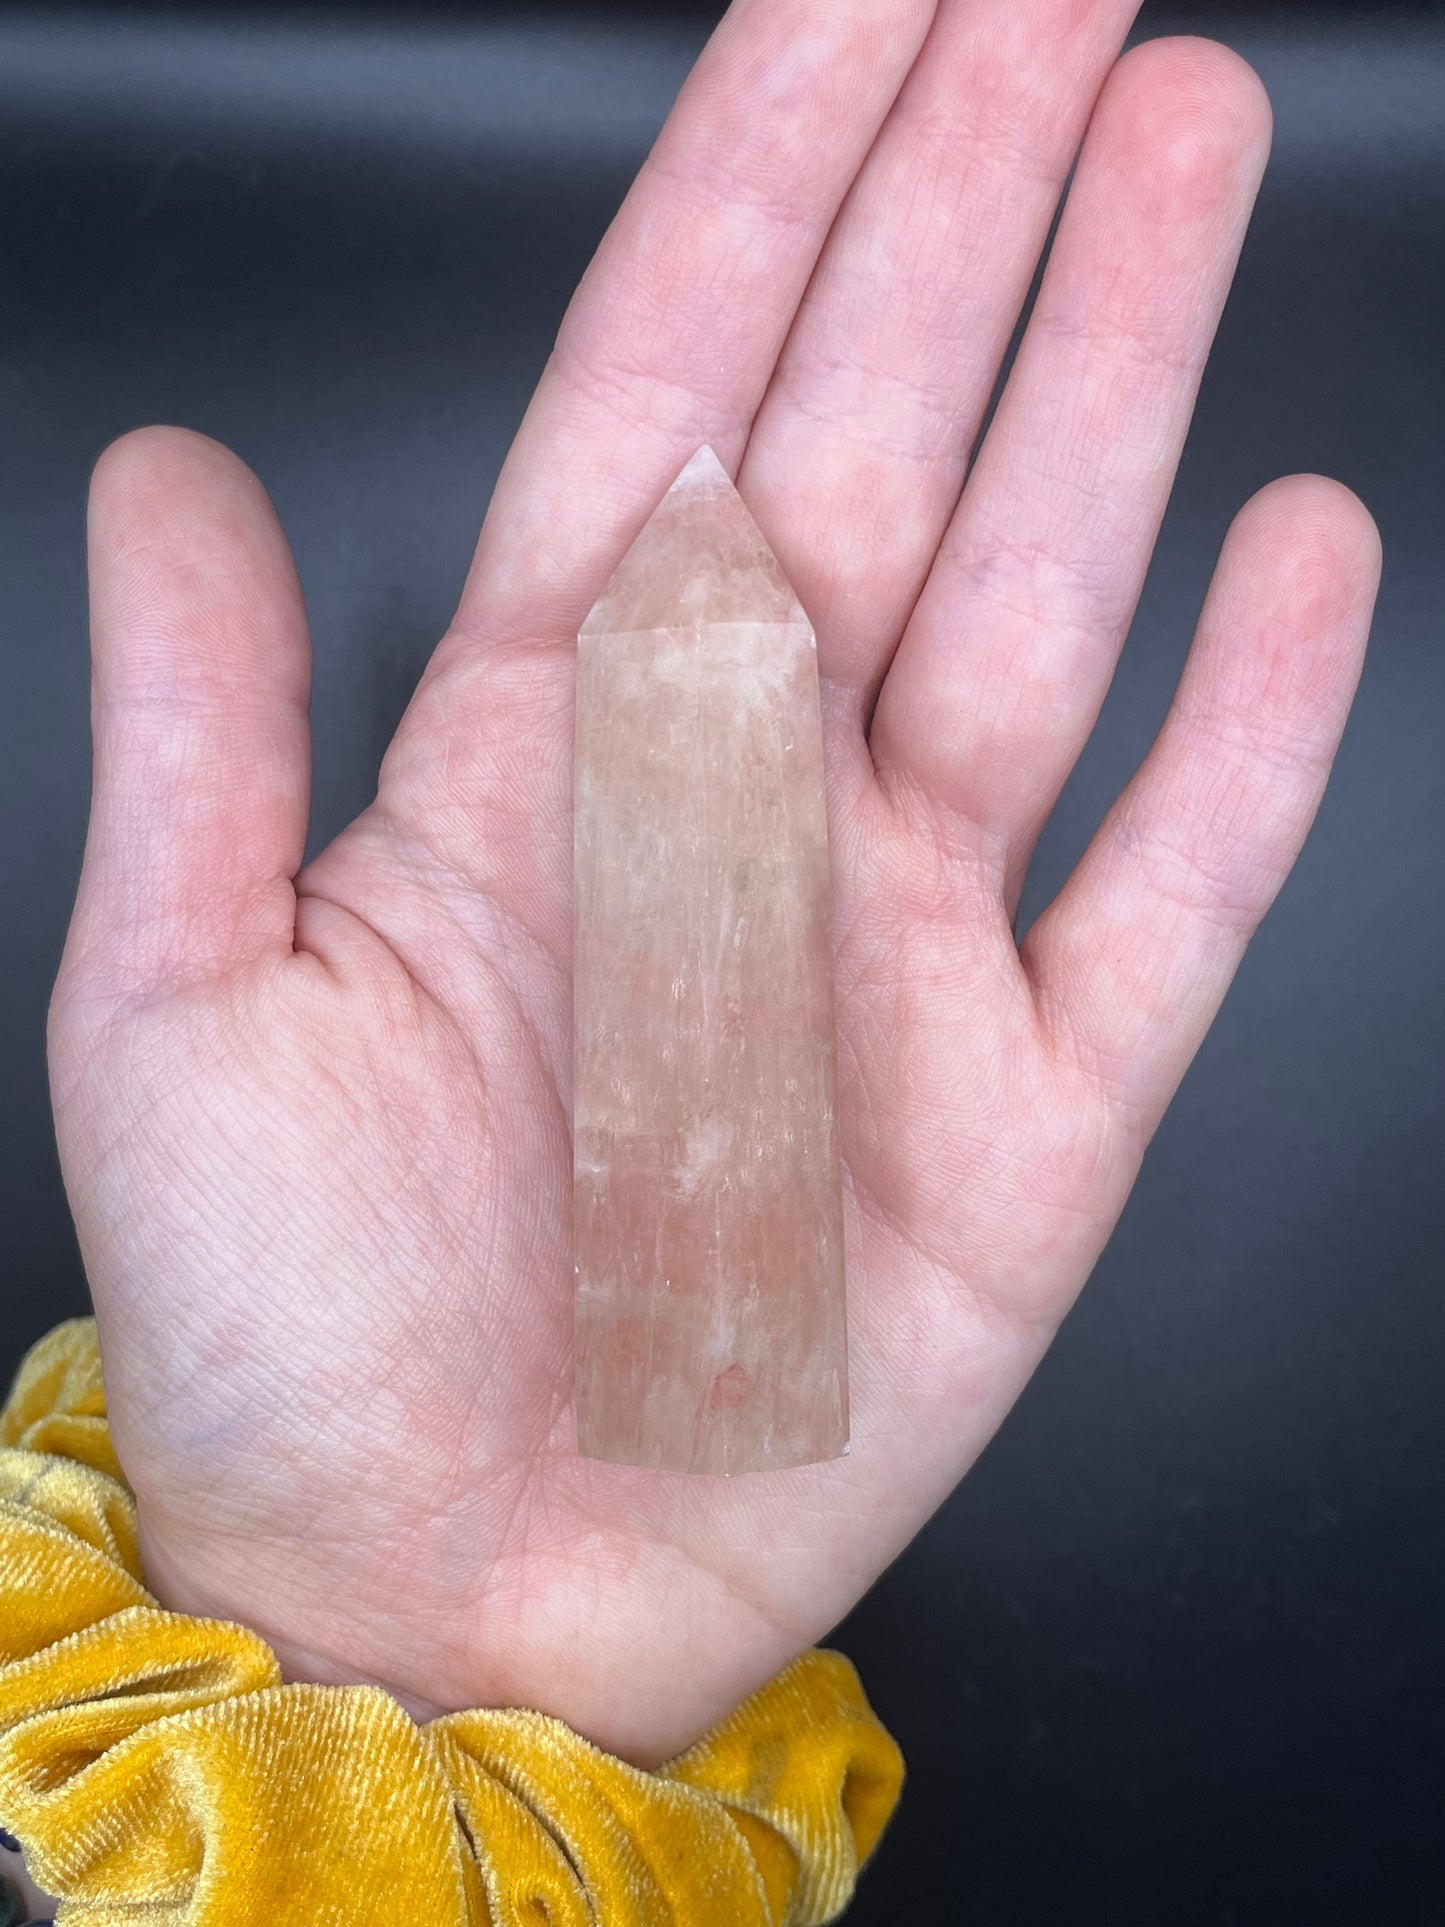 Strawberry Calcite Points